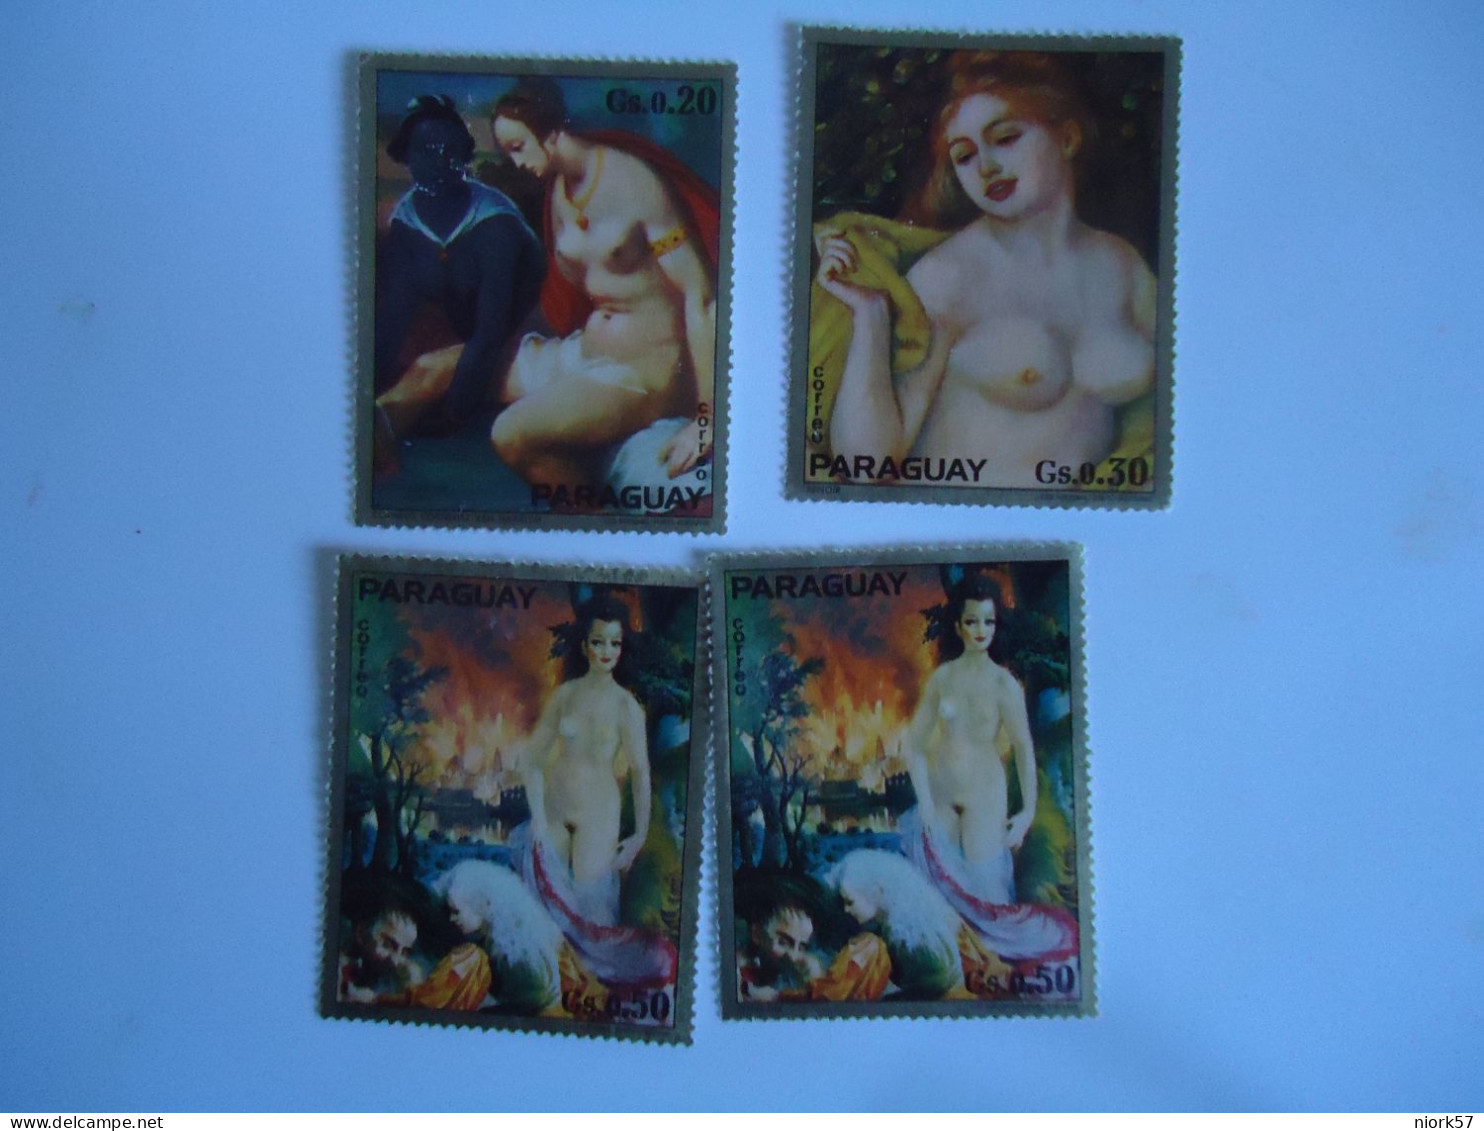 PARAGUAY  MNH 3 MLN 1 4 STAMPS  PAINTINGS NUDES - Naakt